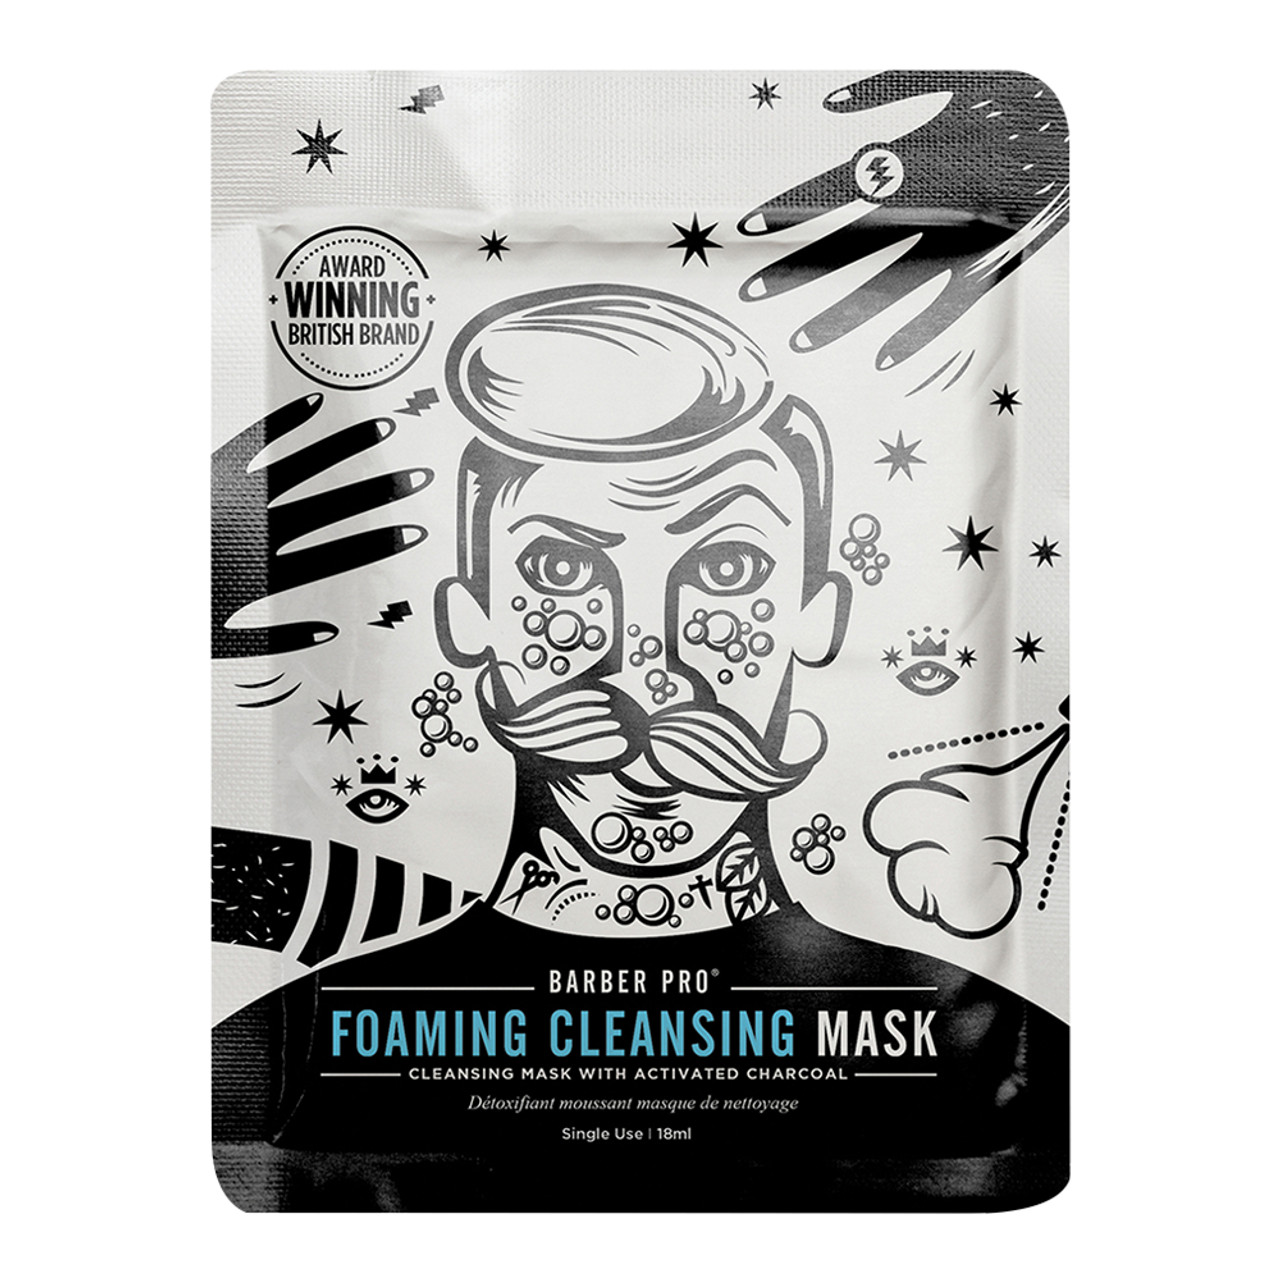 Barber Pro Foaming Cleansing Mask 20ml RRP £5 CLEARANCE XL £3.99